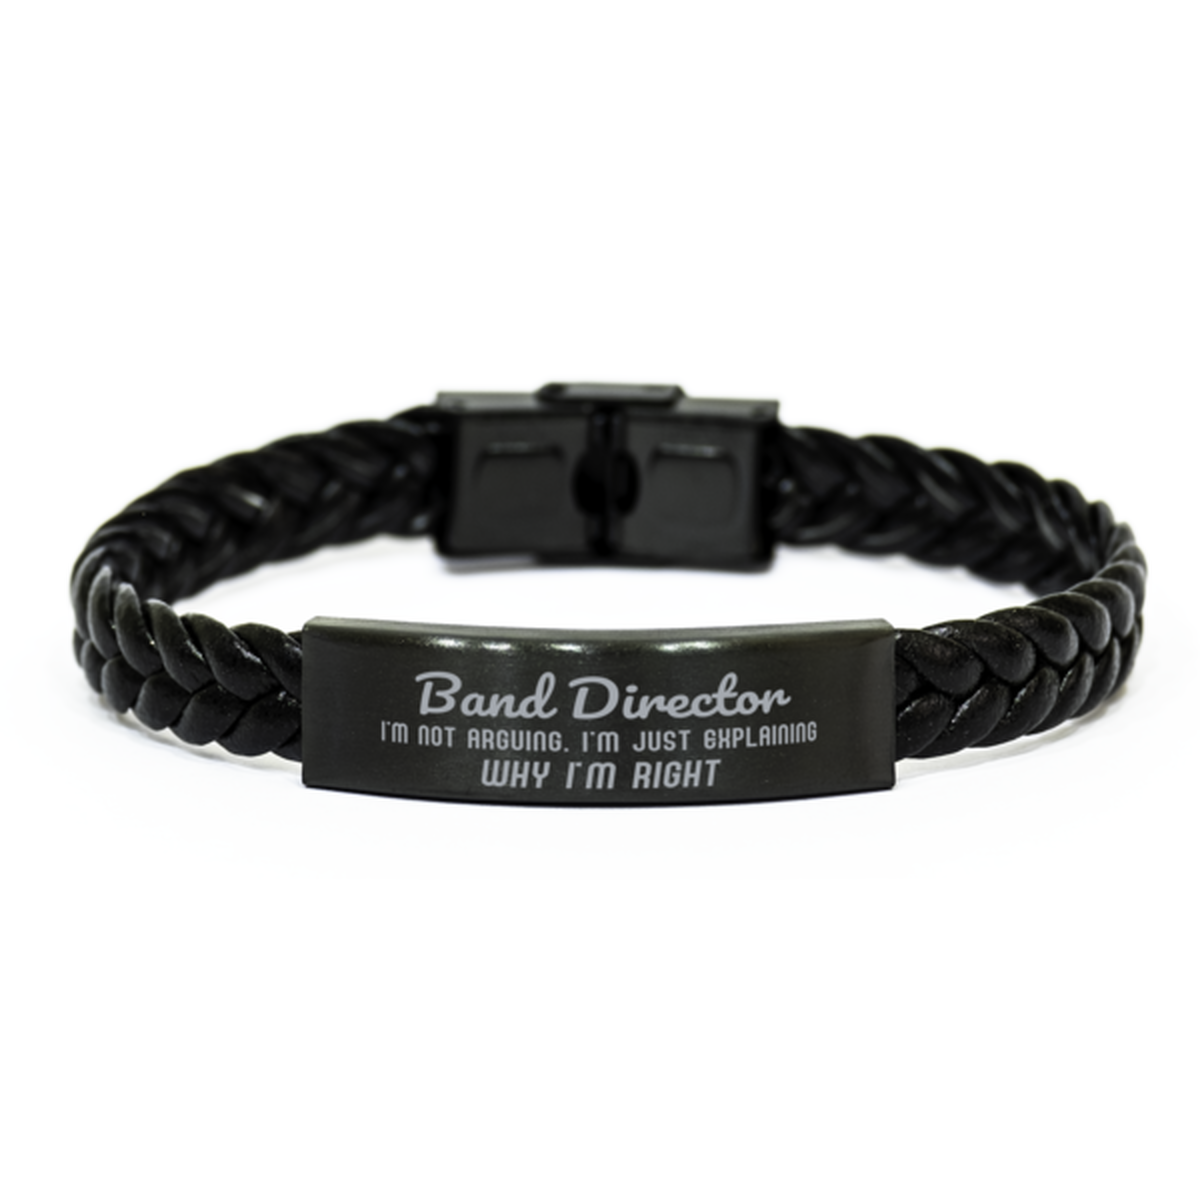 Band Director I'm not Arguing. I'm Just Explaining Why I'm RIGHT Braided Leather Bracelet, Graduation Birthday Christmas Band Director Gifts For Band Director Funny Saying Quote Present for Men Women Coworker